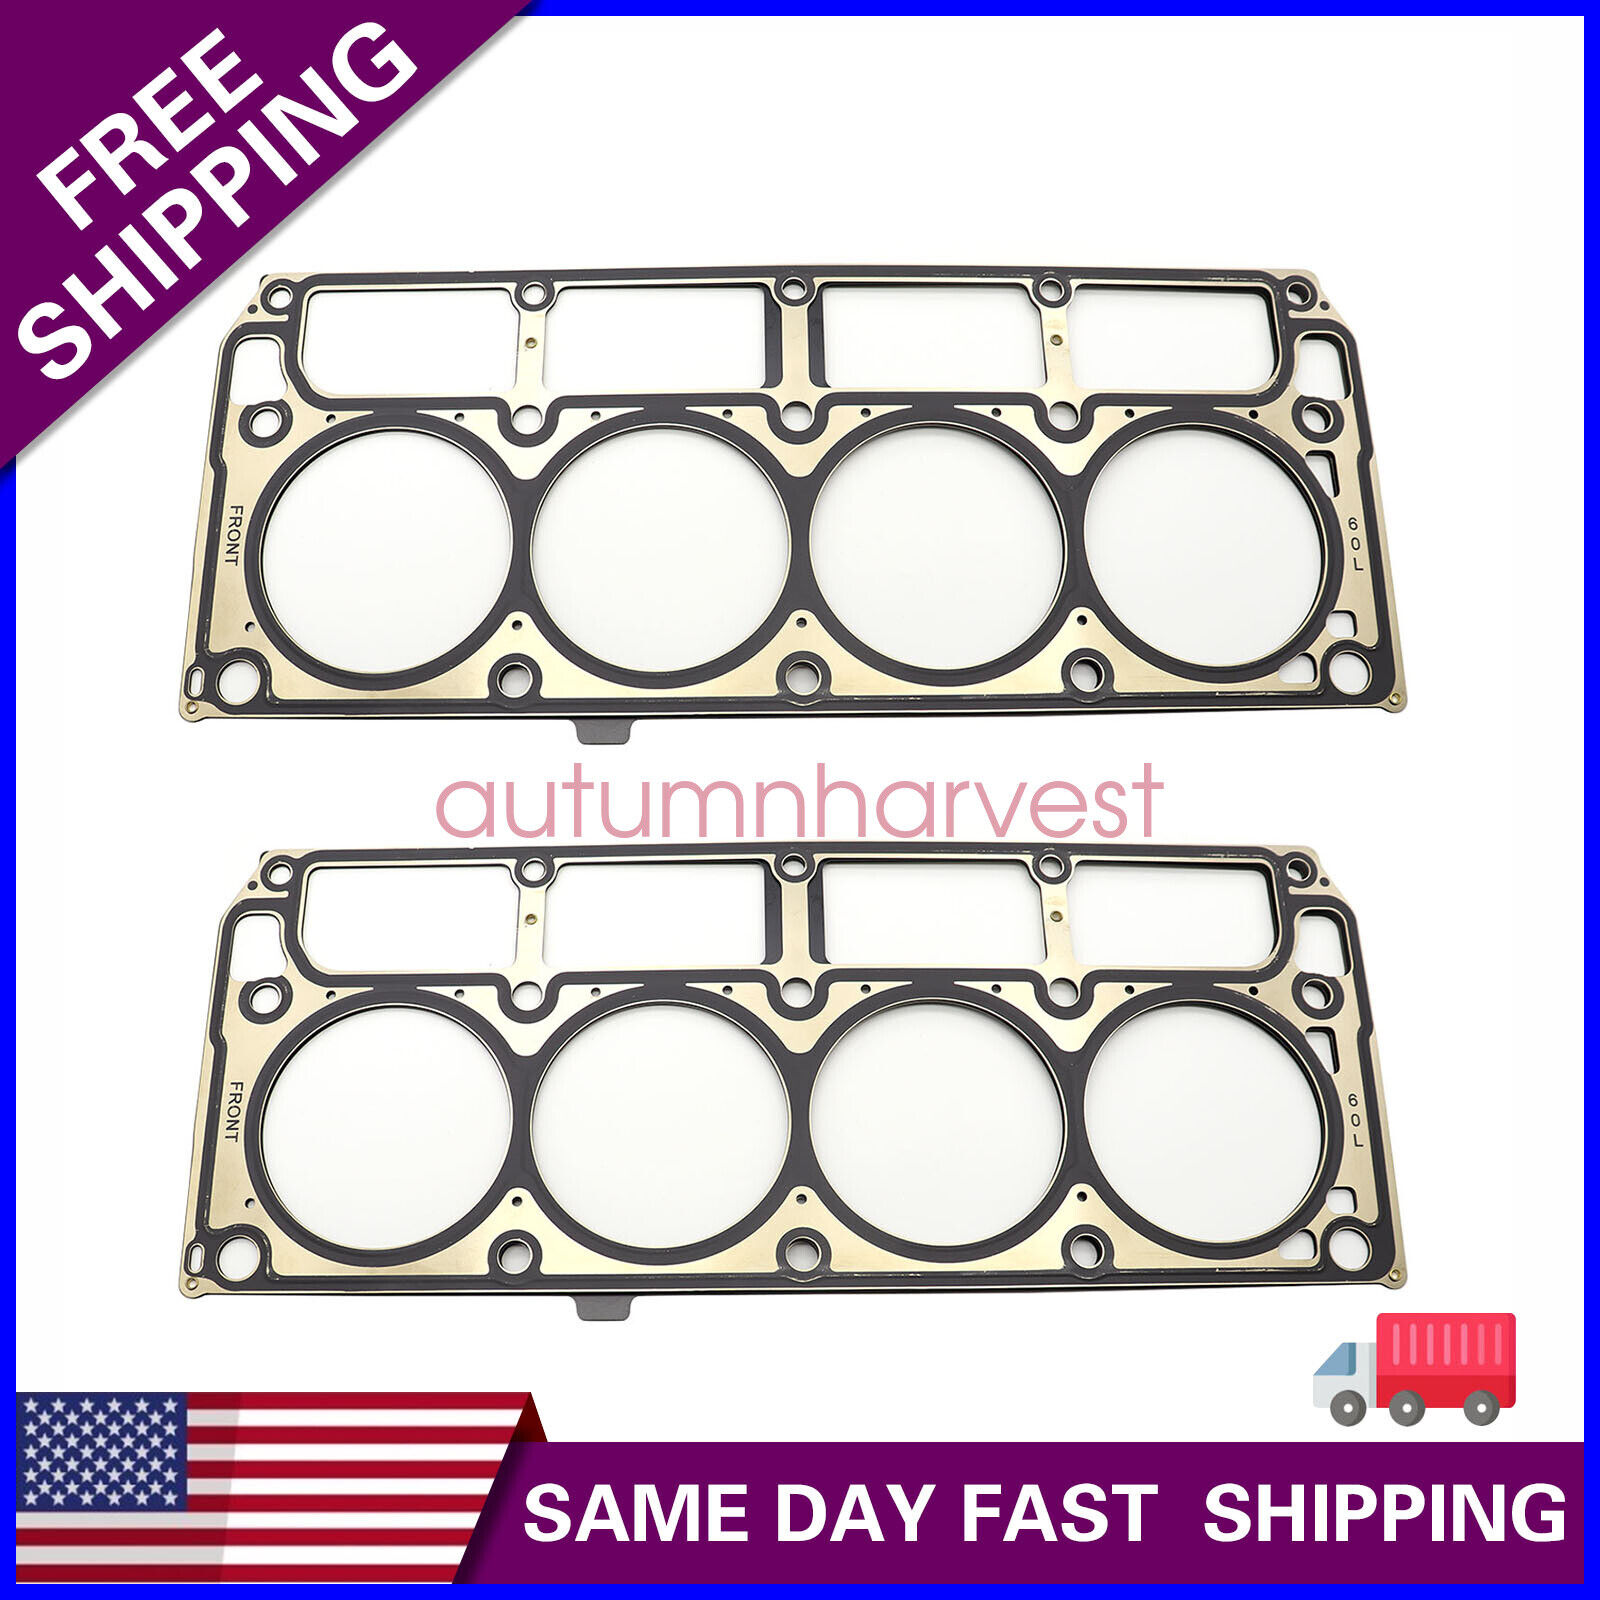 2* LS9 Cylinder Head Gaskets for Chevrolet Corvette Cadillac CTS GM 12622033 US